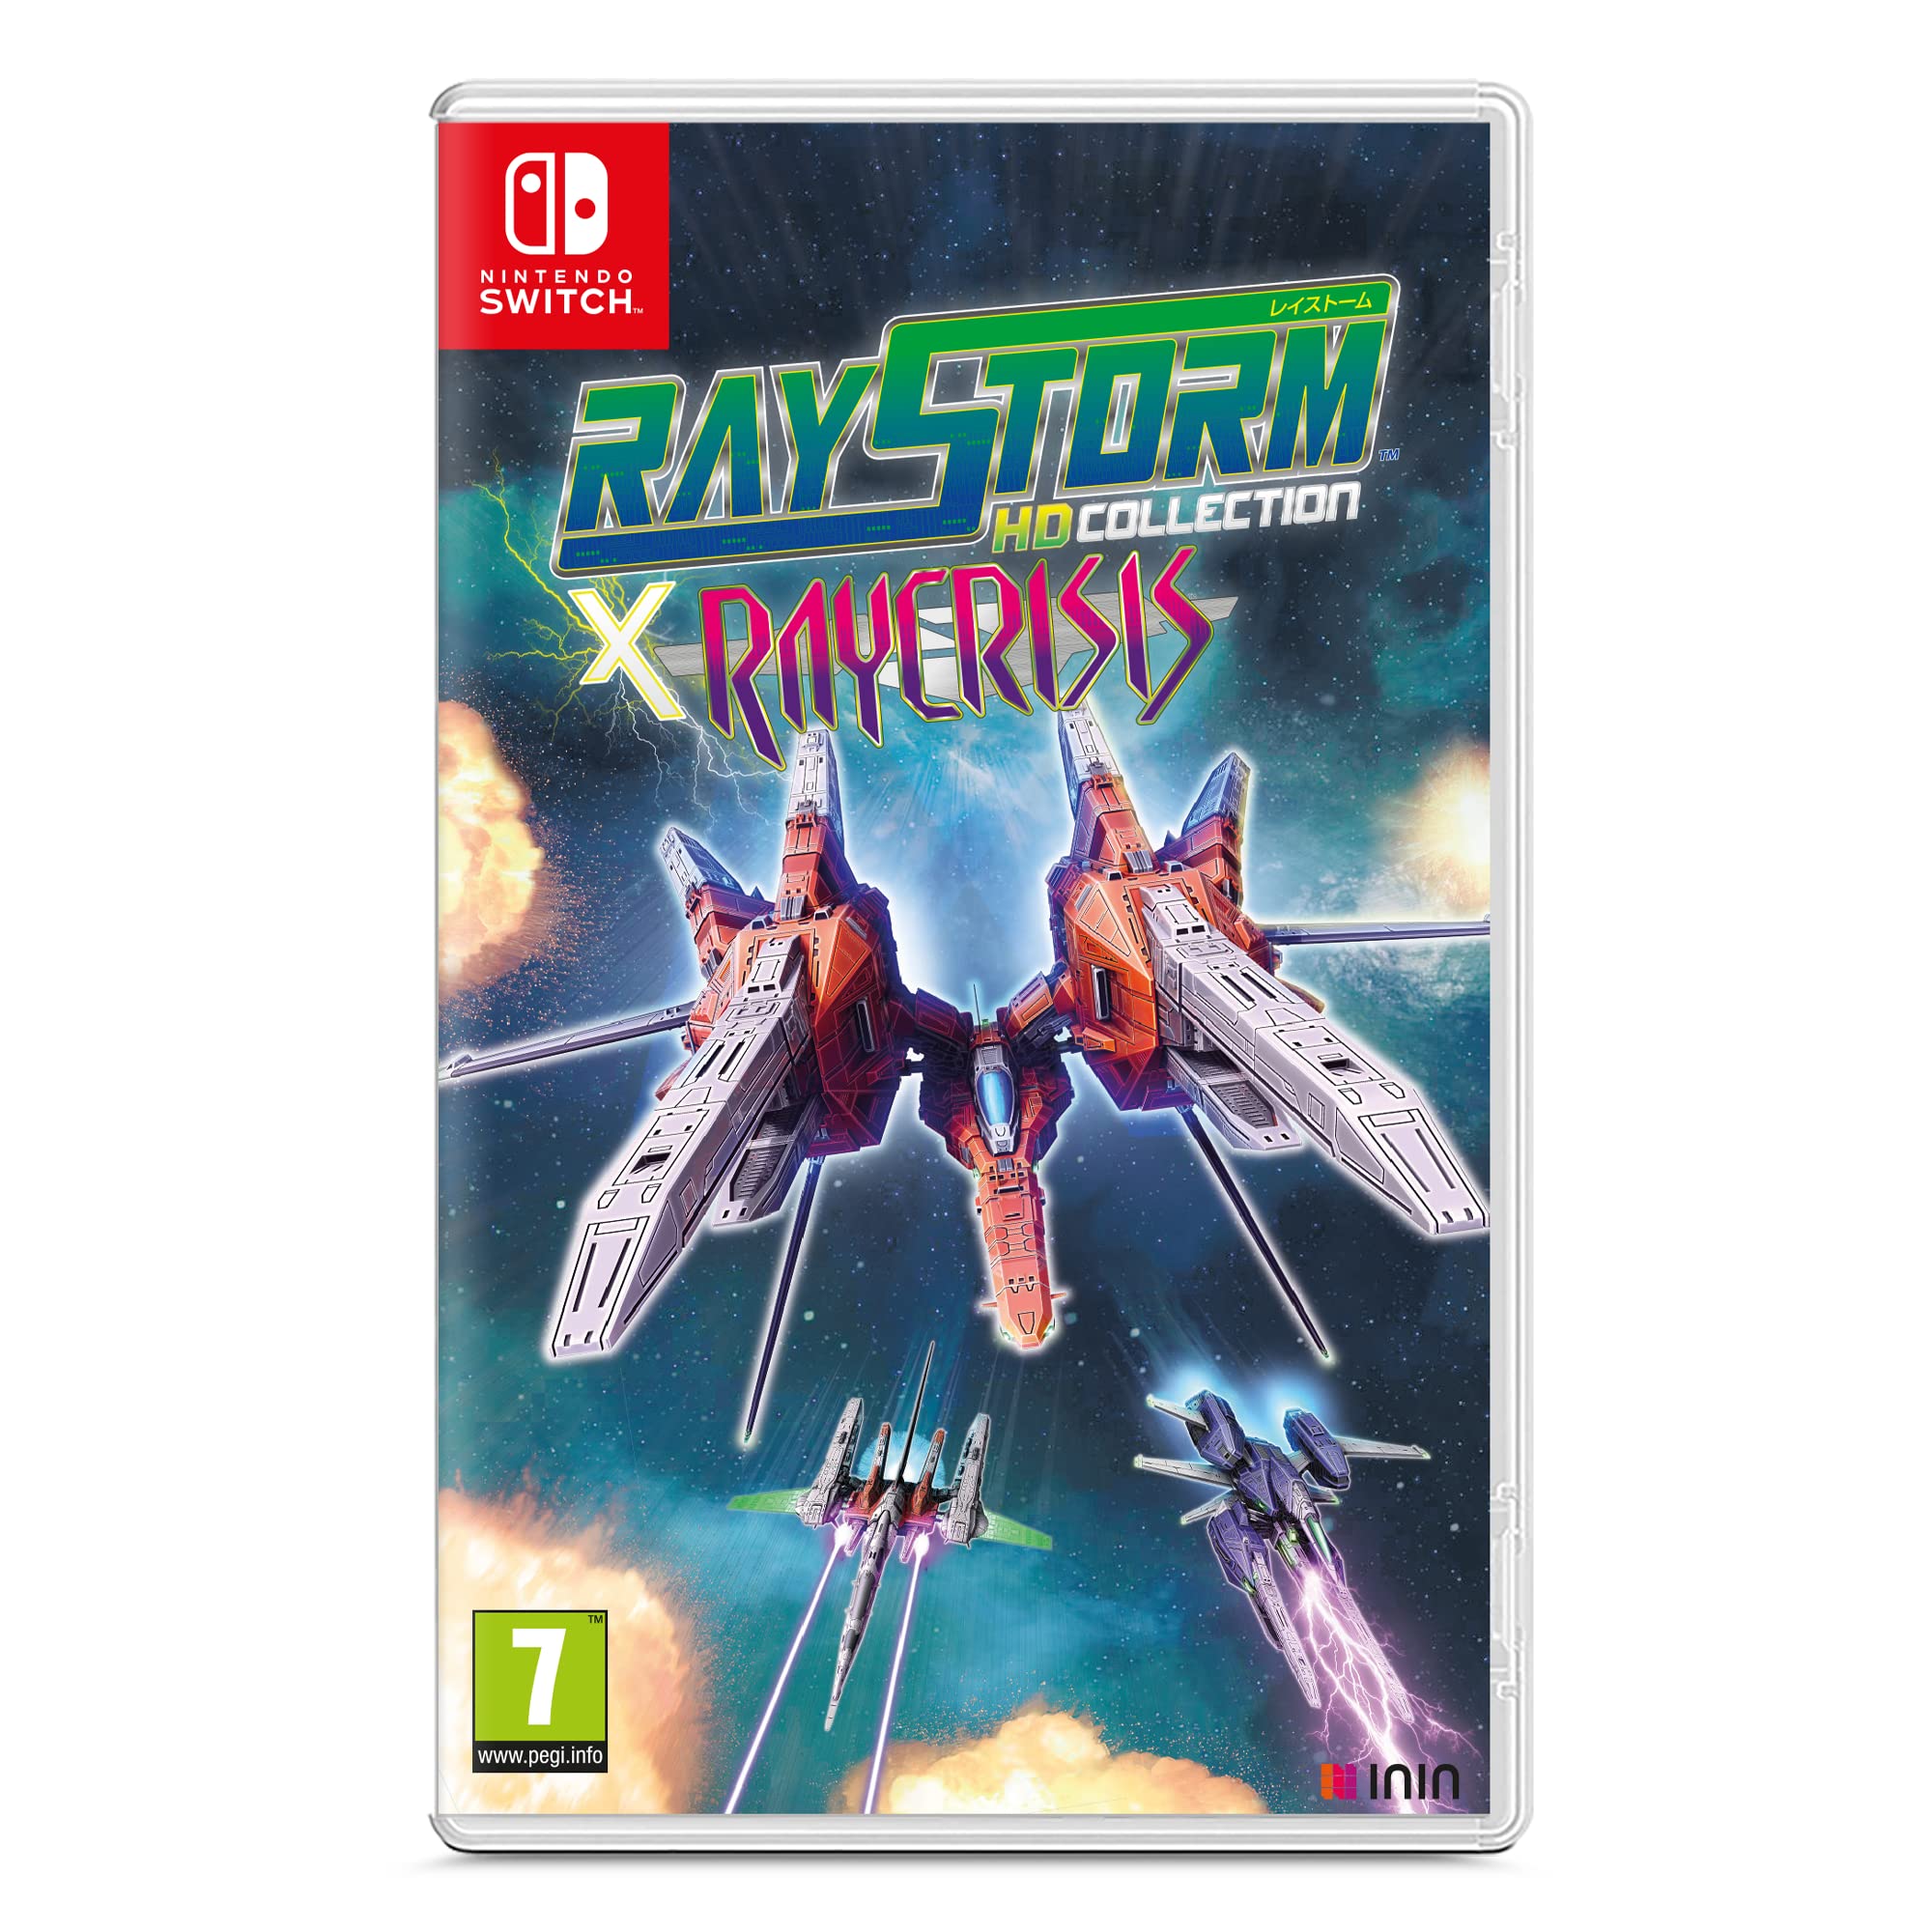 Populaire RayStorm x RayCrisis HD Collection Nintendo Switch Qsc18TP8x meilleure vente